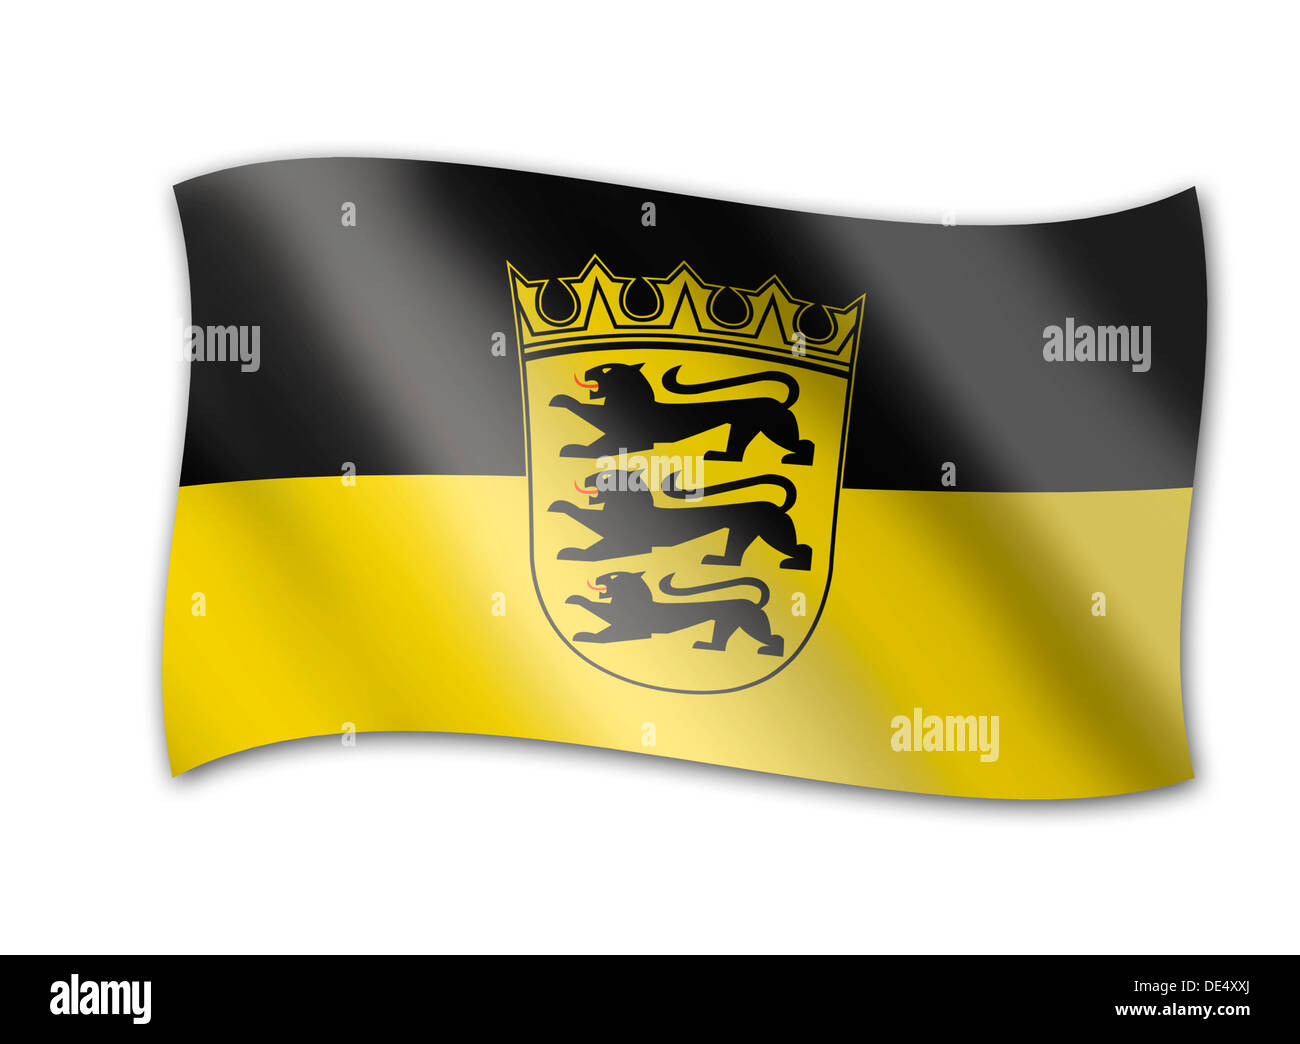 Deutschland Germany Allemagne Coat of Arms Sticker Decal Self